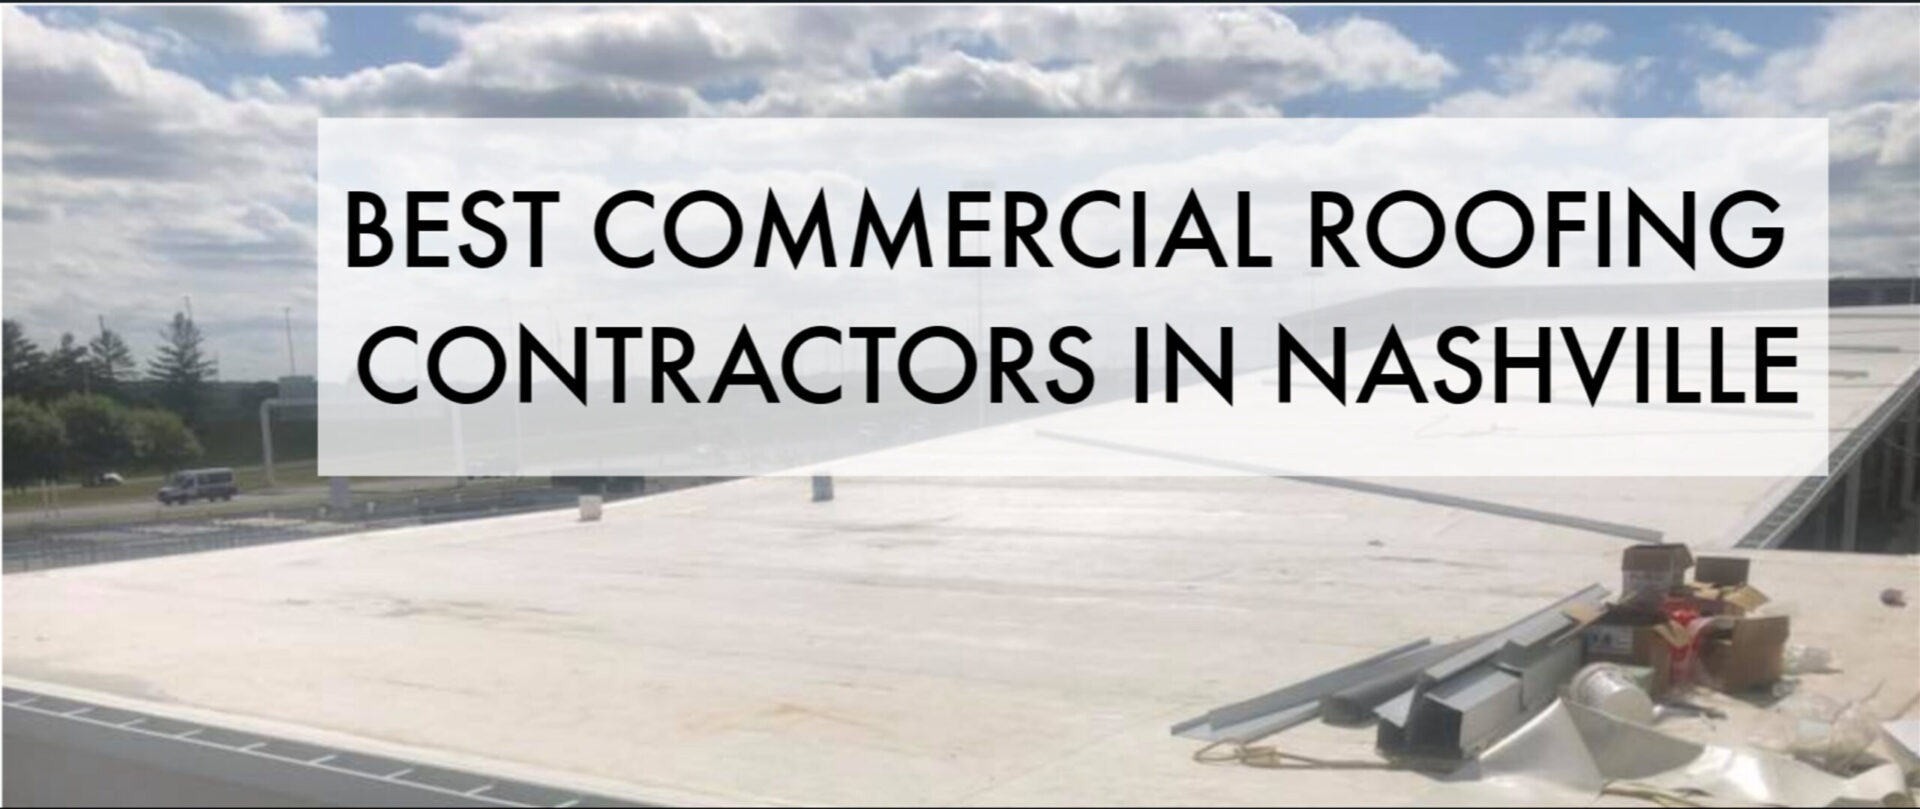 who is the best commercial roofing contractor in nashville